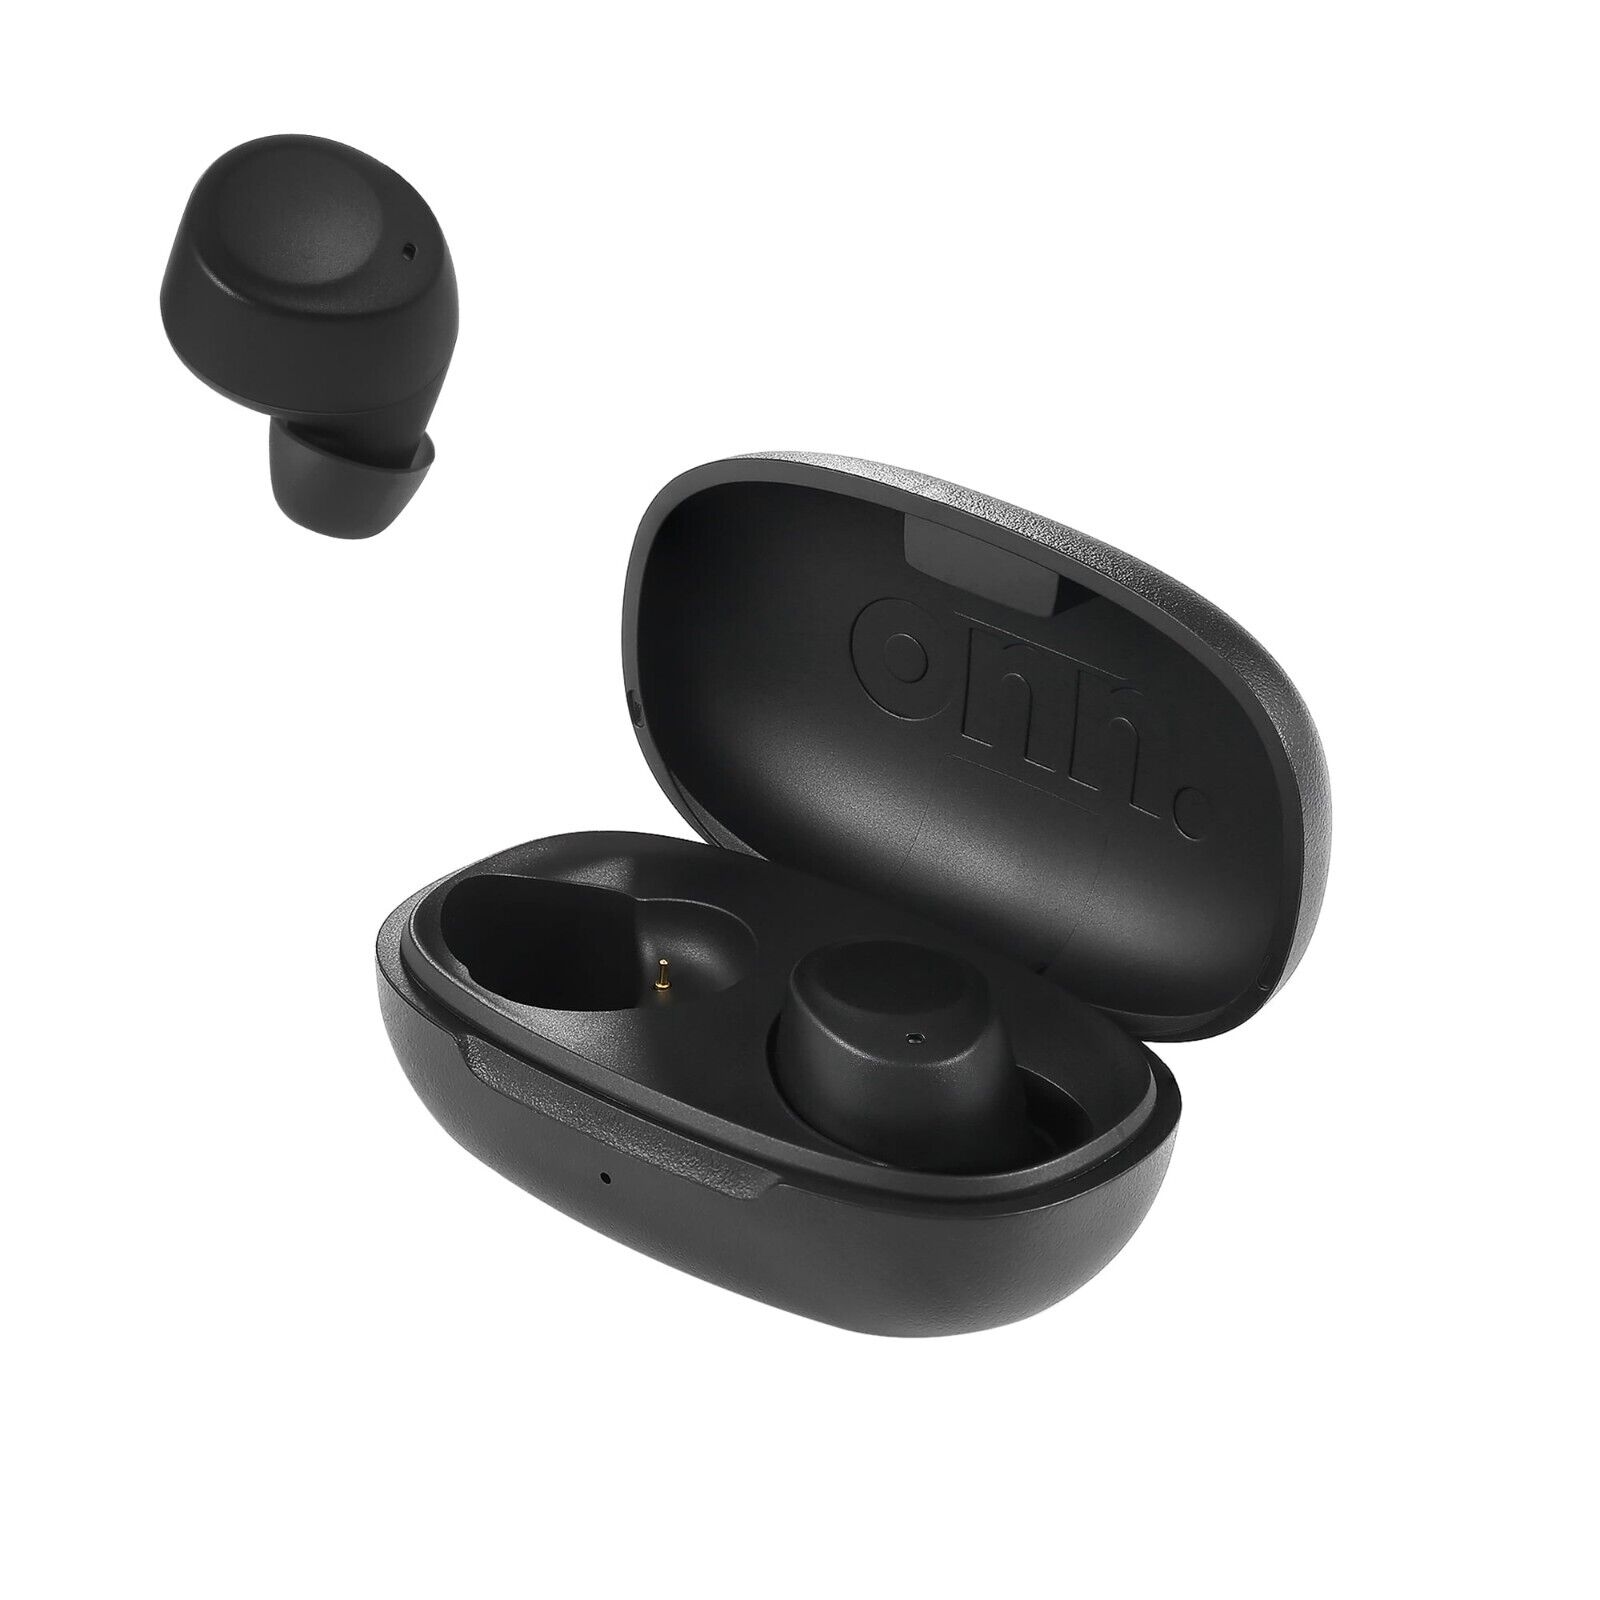 Pairing Onn Wireless Earbuds: A Step-by-Step Tutorial